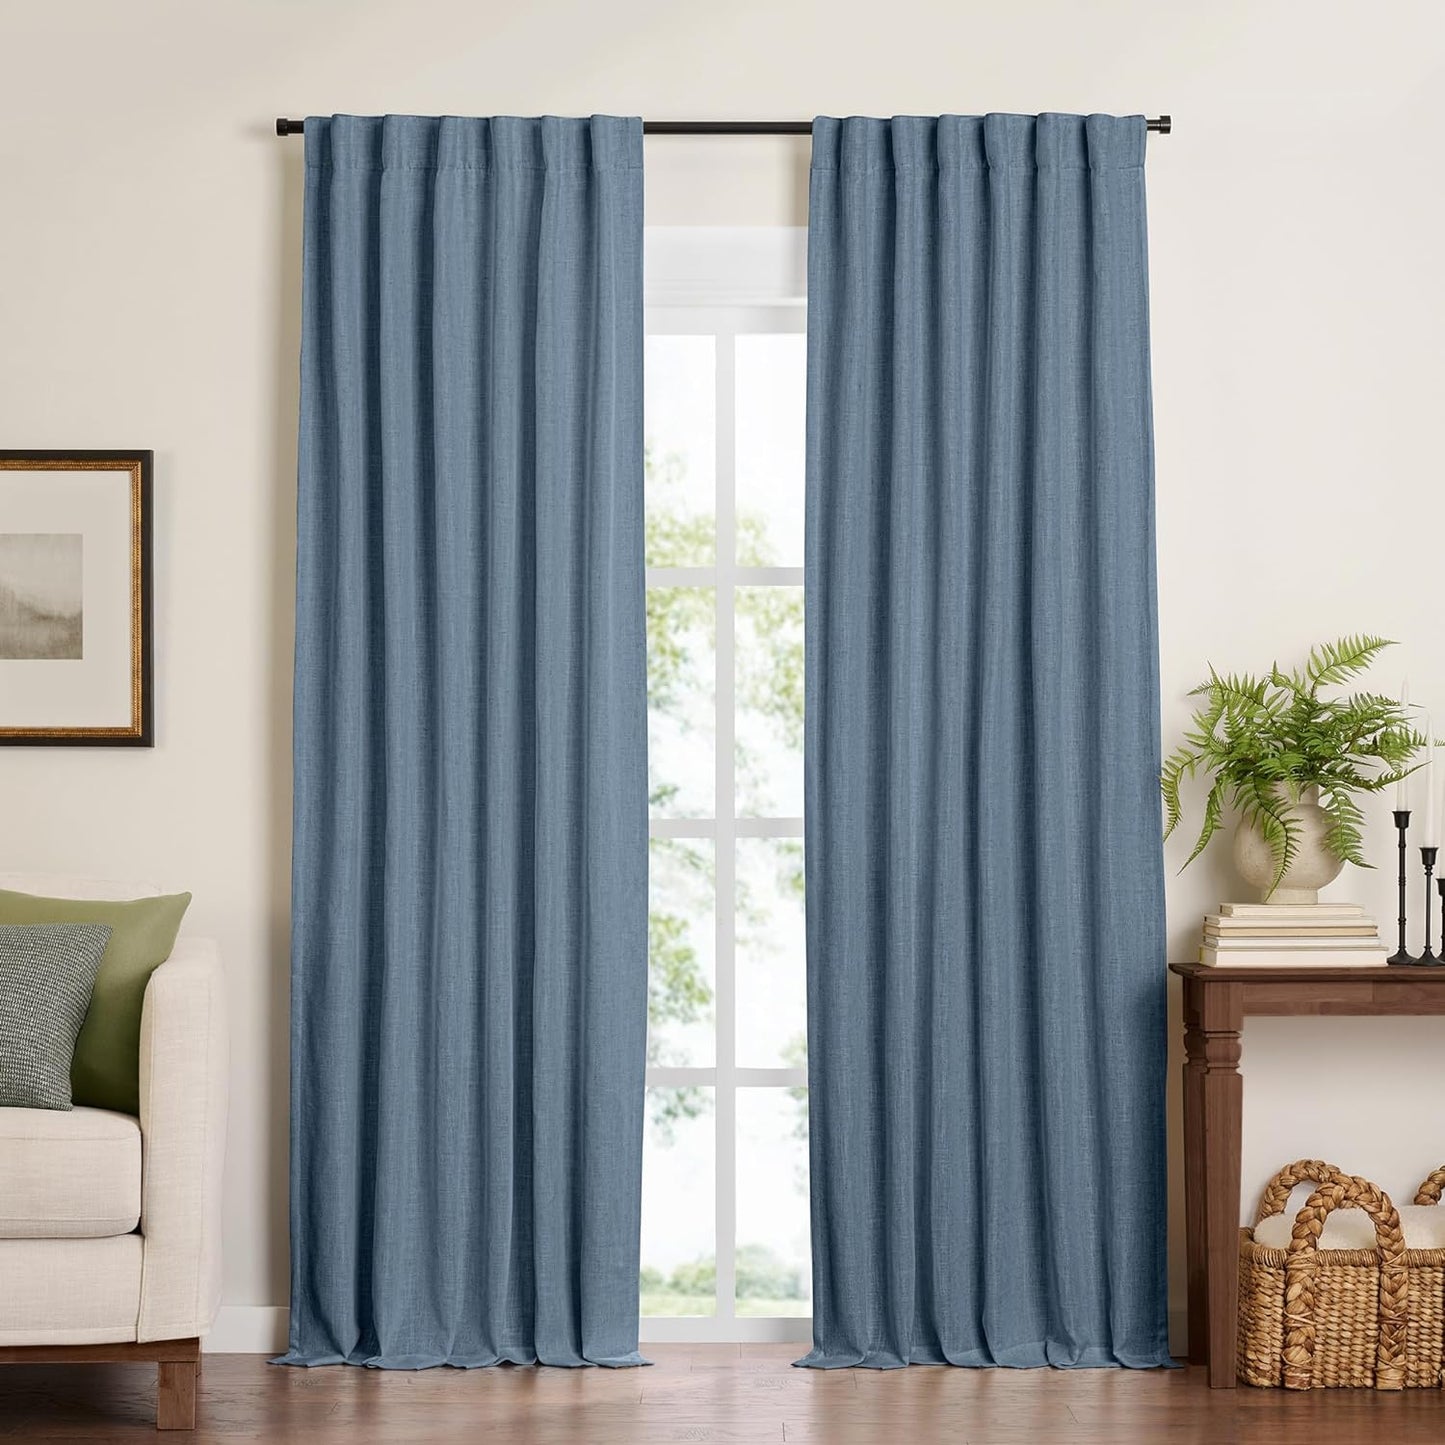 Elrene Home Fashions Harrow Solid Texture Blackout Single Window Curtain Panel, 52"X84", Natural  Elrene Home Fashions Blue 52"X108" (1 Panel) 